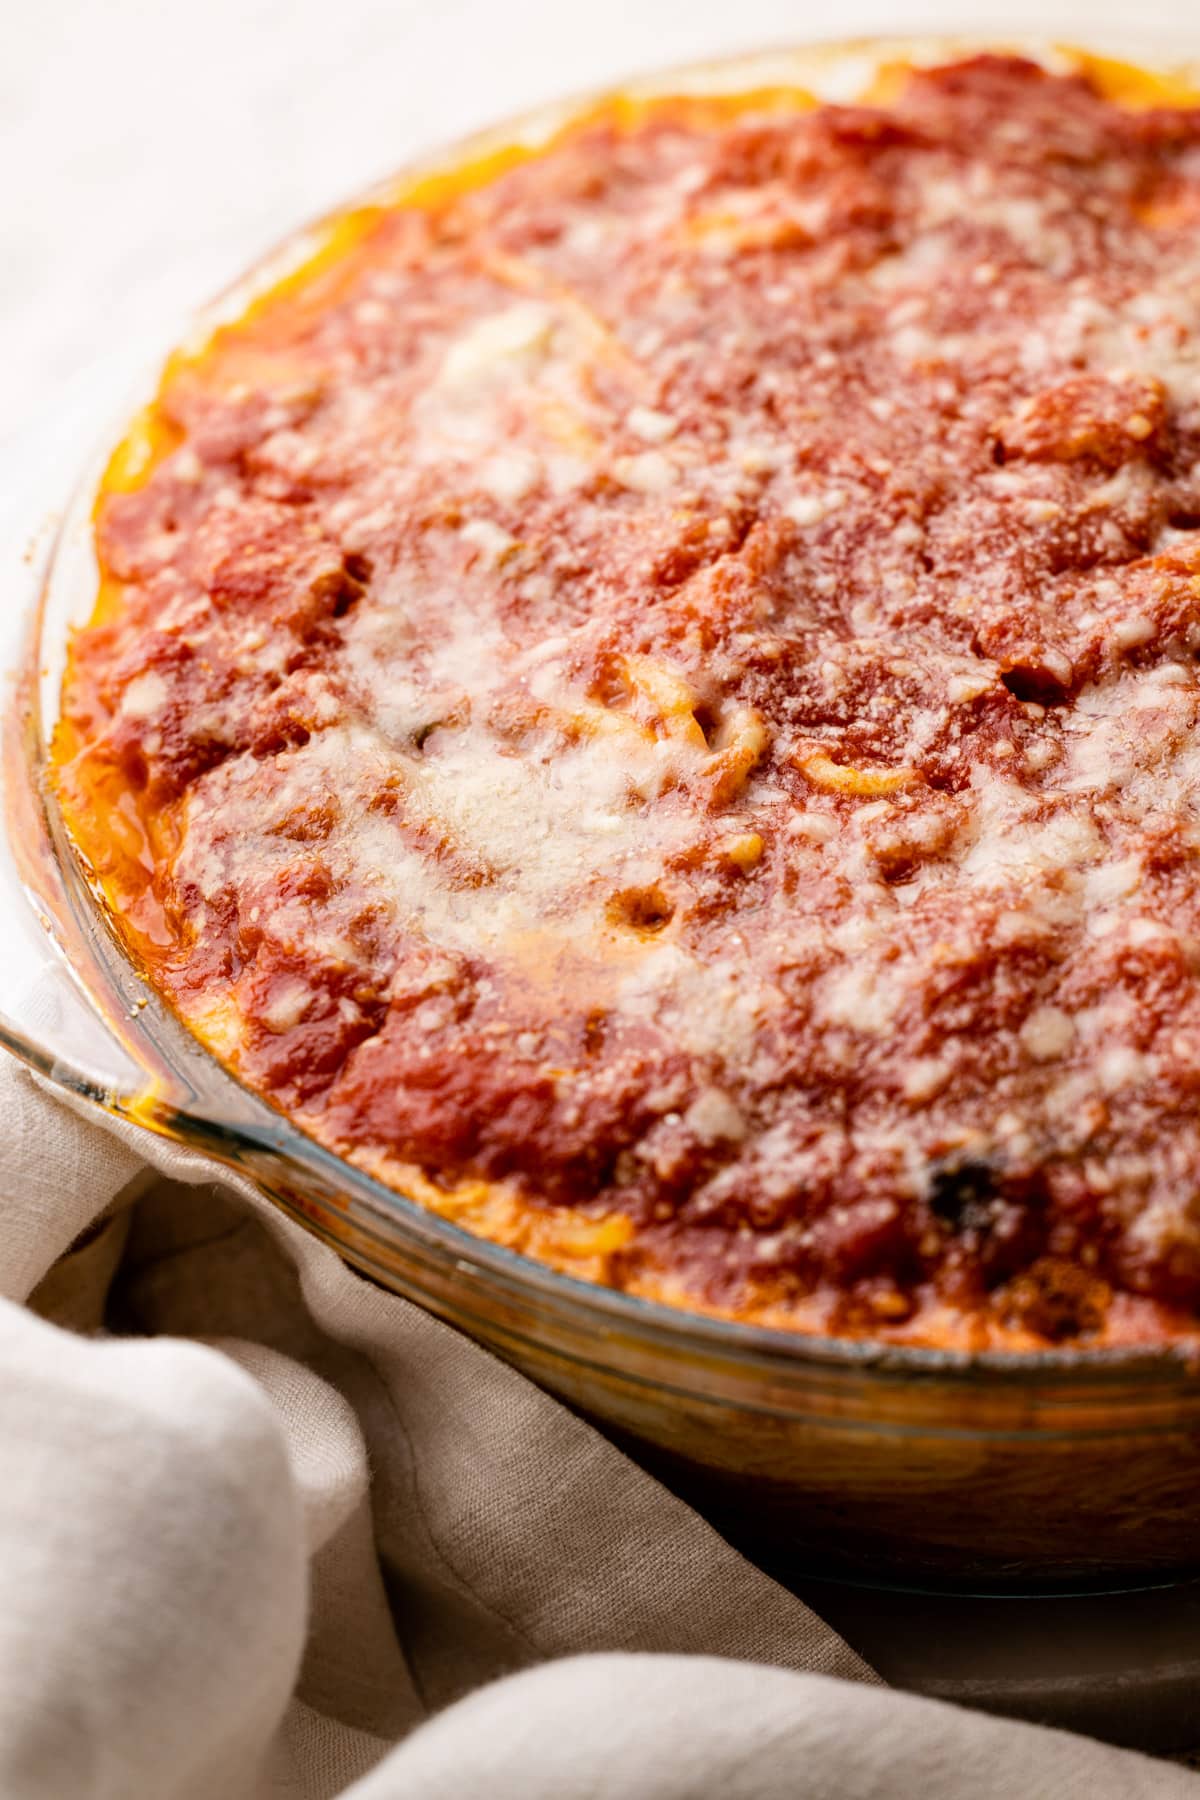 A spaghetti pie with tomato sauce and Parm cheese.